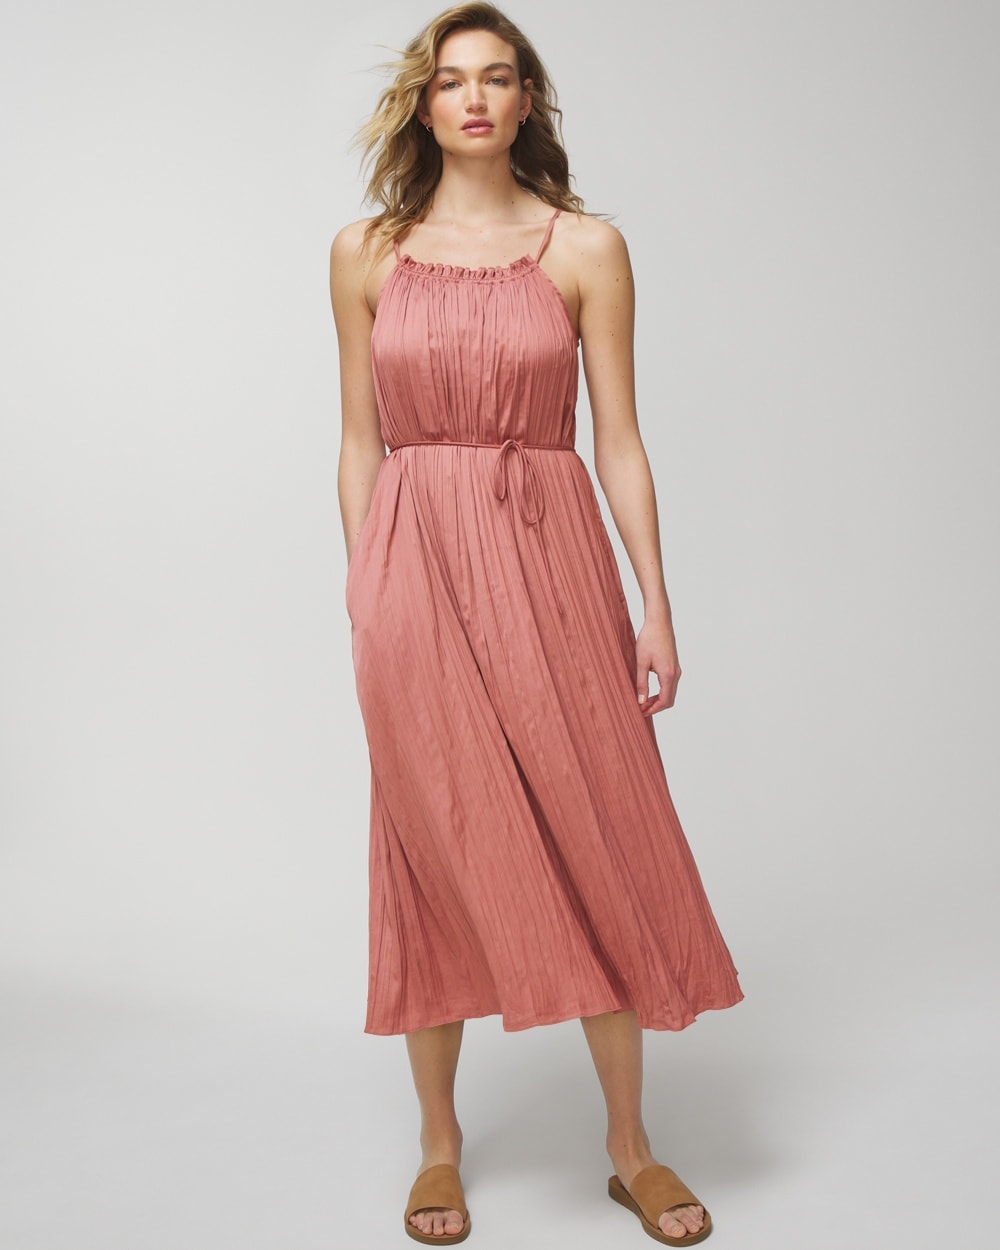 Soma Women's Satin Pleated Midi Sundress With Built-in Bra In Pink Size 2xl |  In Clay Rose